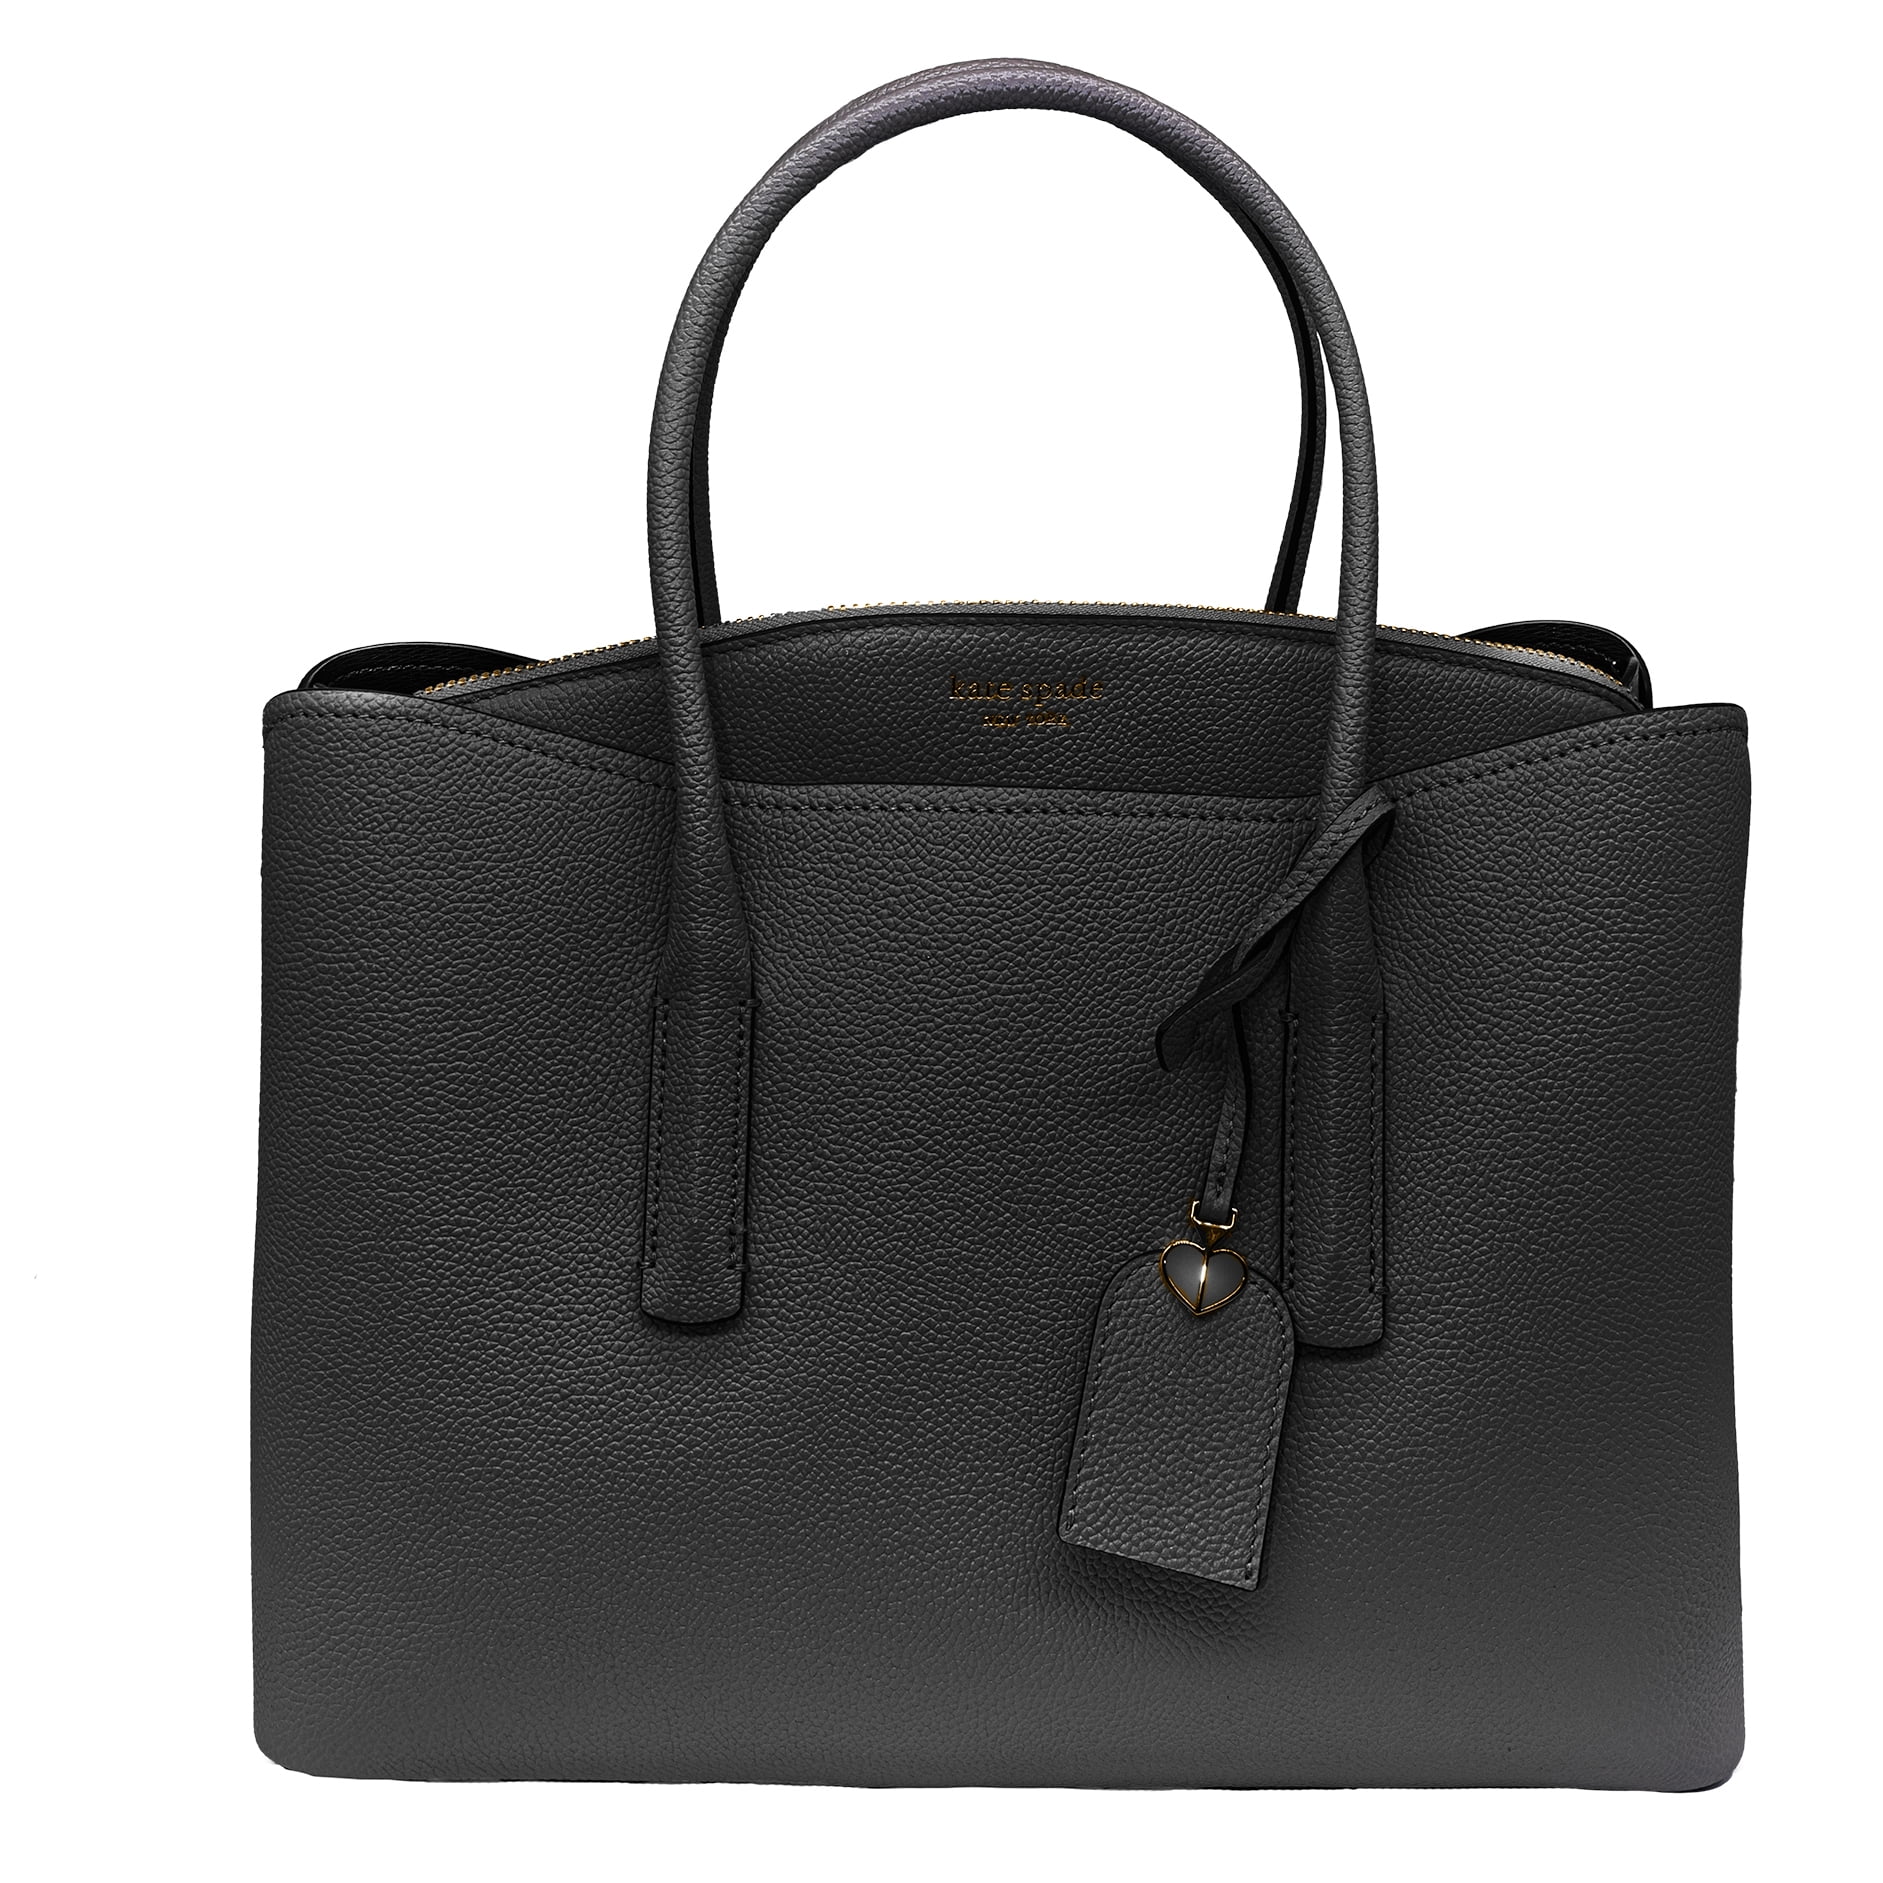 Patent leather tote Kate Spade Black in Patent leather - 40456619